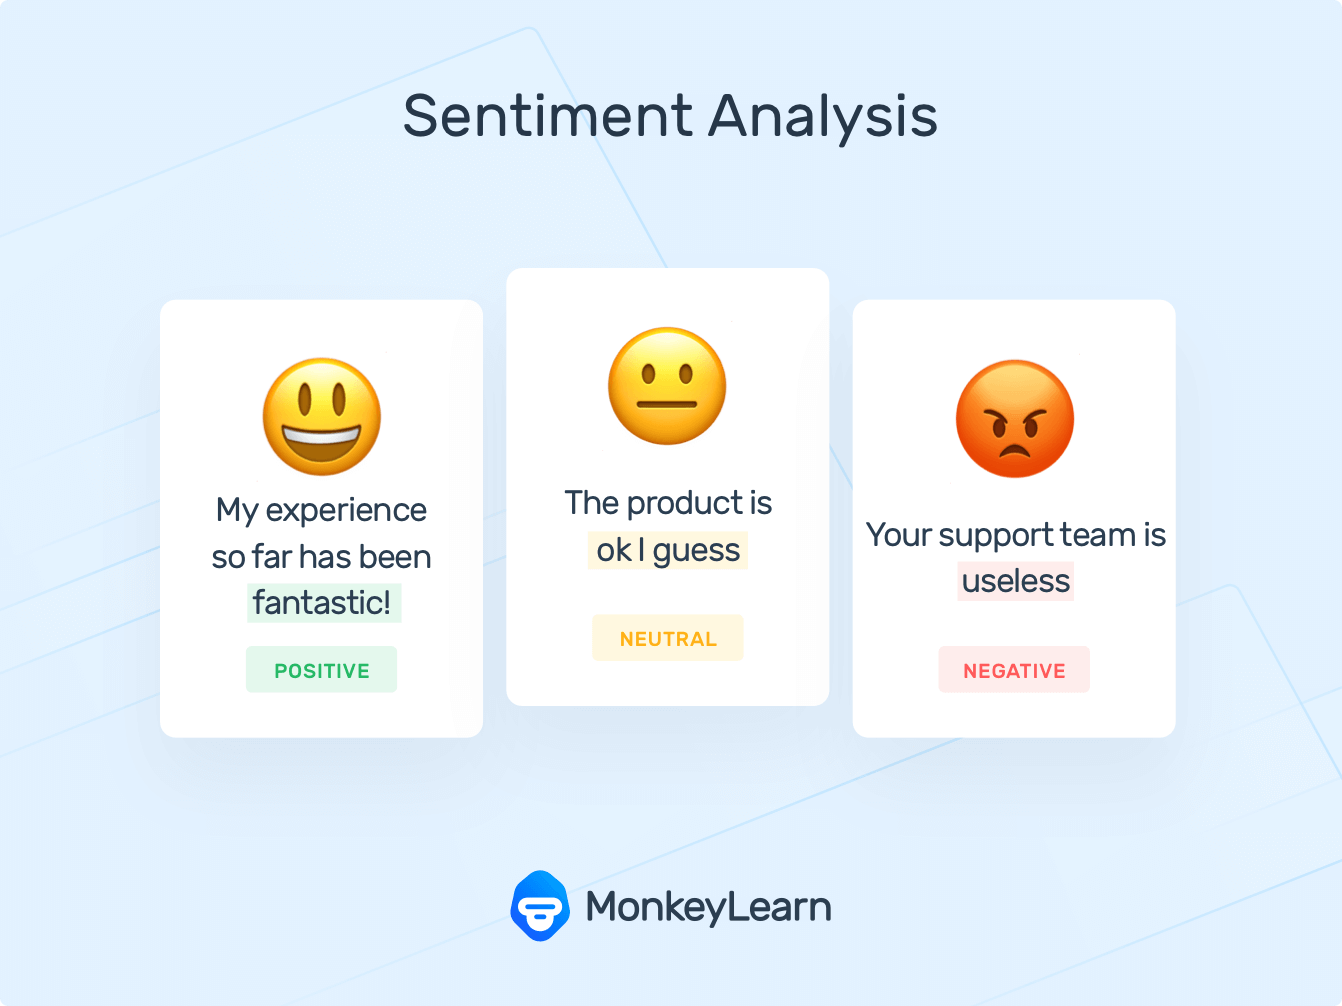 Emojis as representations of sentiments: positive, neutral, and negative to show how sentiment analysis works. Text reads 'my experience so far has been fantastic!' (positive), 'The product is ok, I guess' (neutral), and 'your support team is useless' (negative).